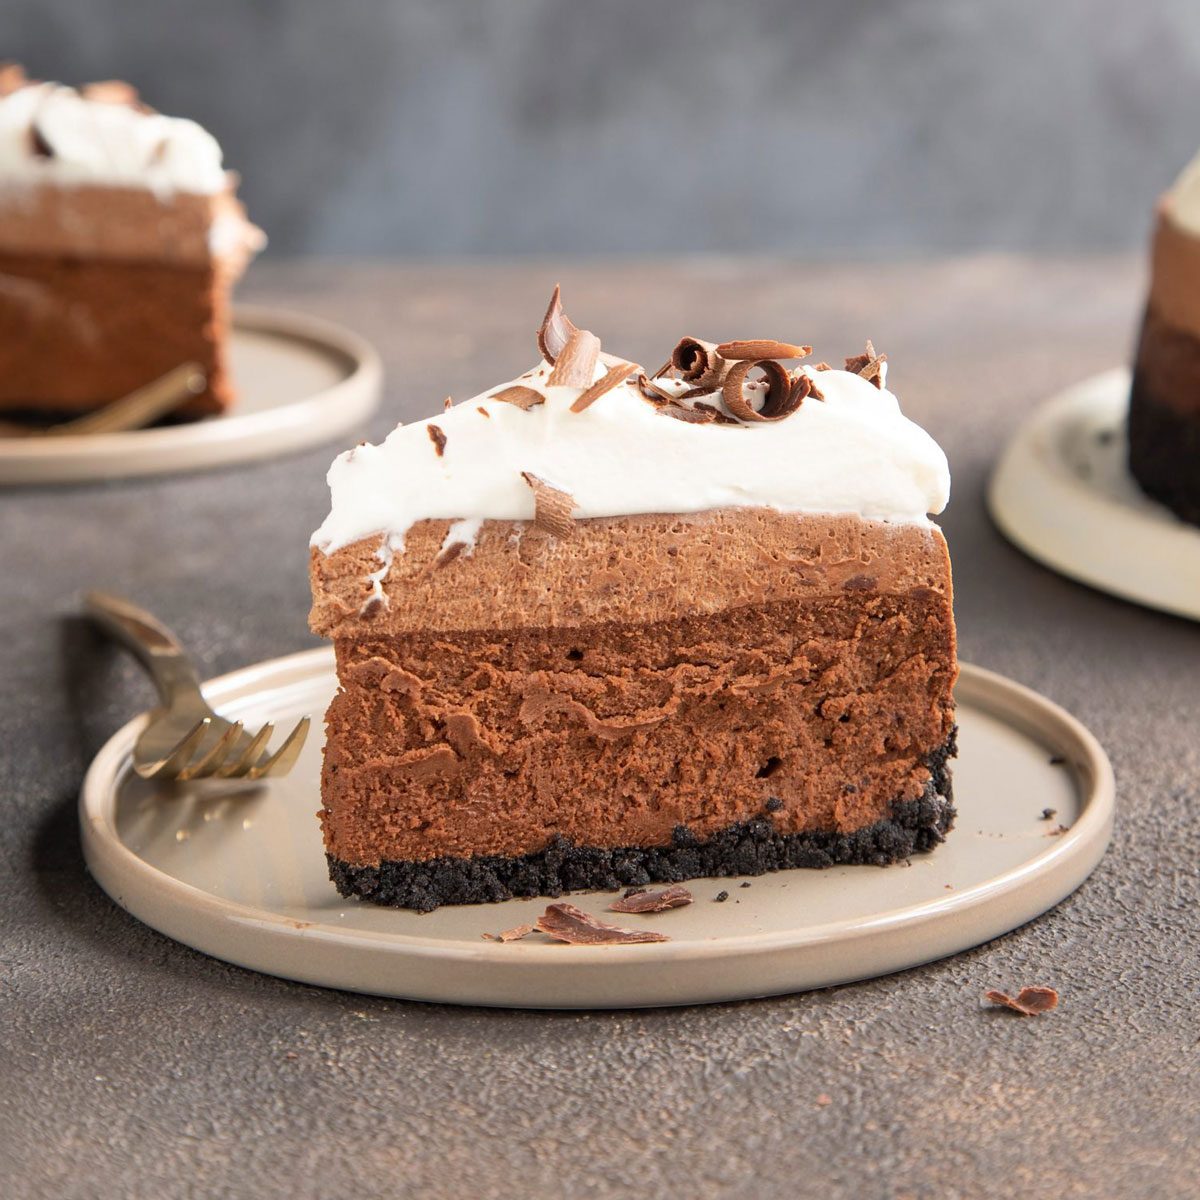 The Cheesecake Factory's Chocolate Mousse Cheesecake